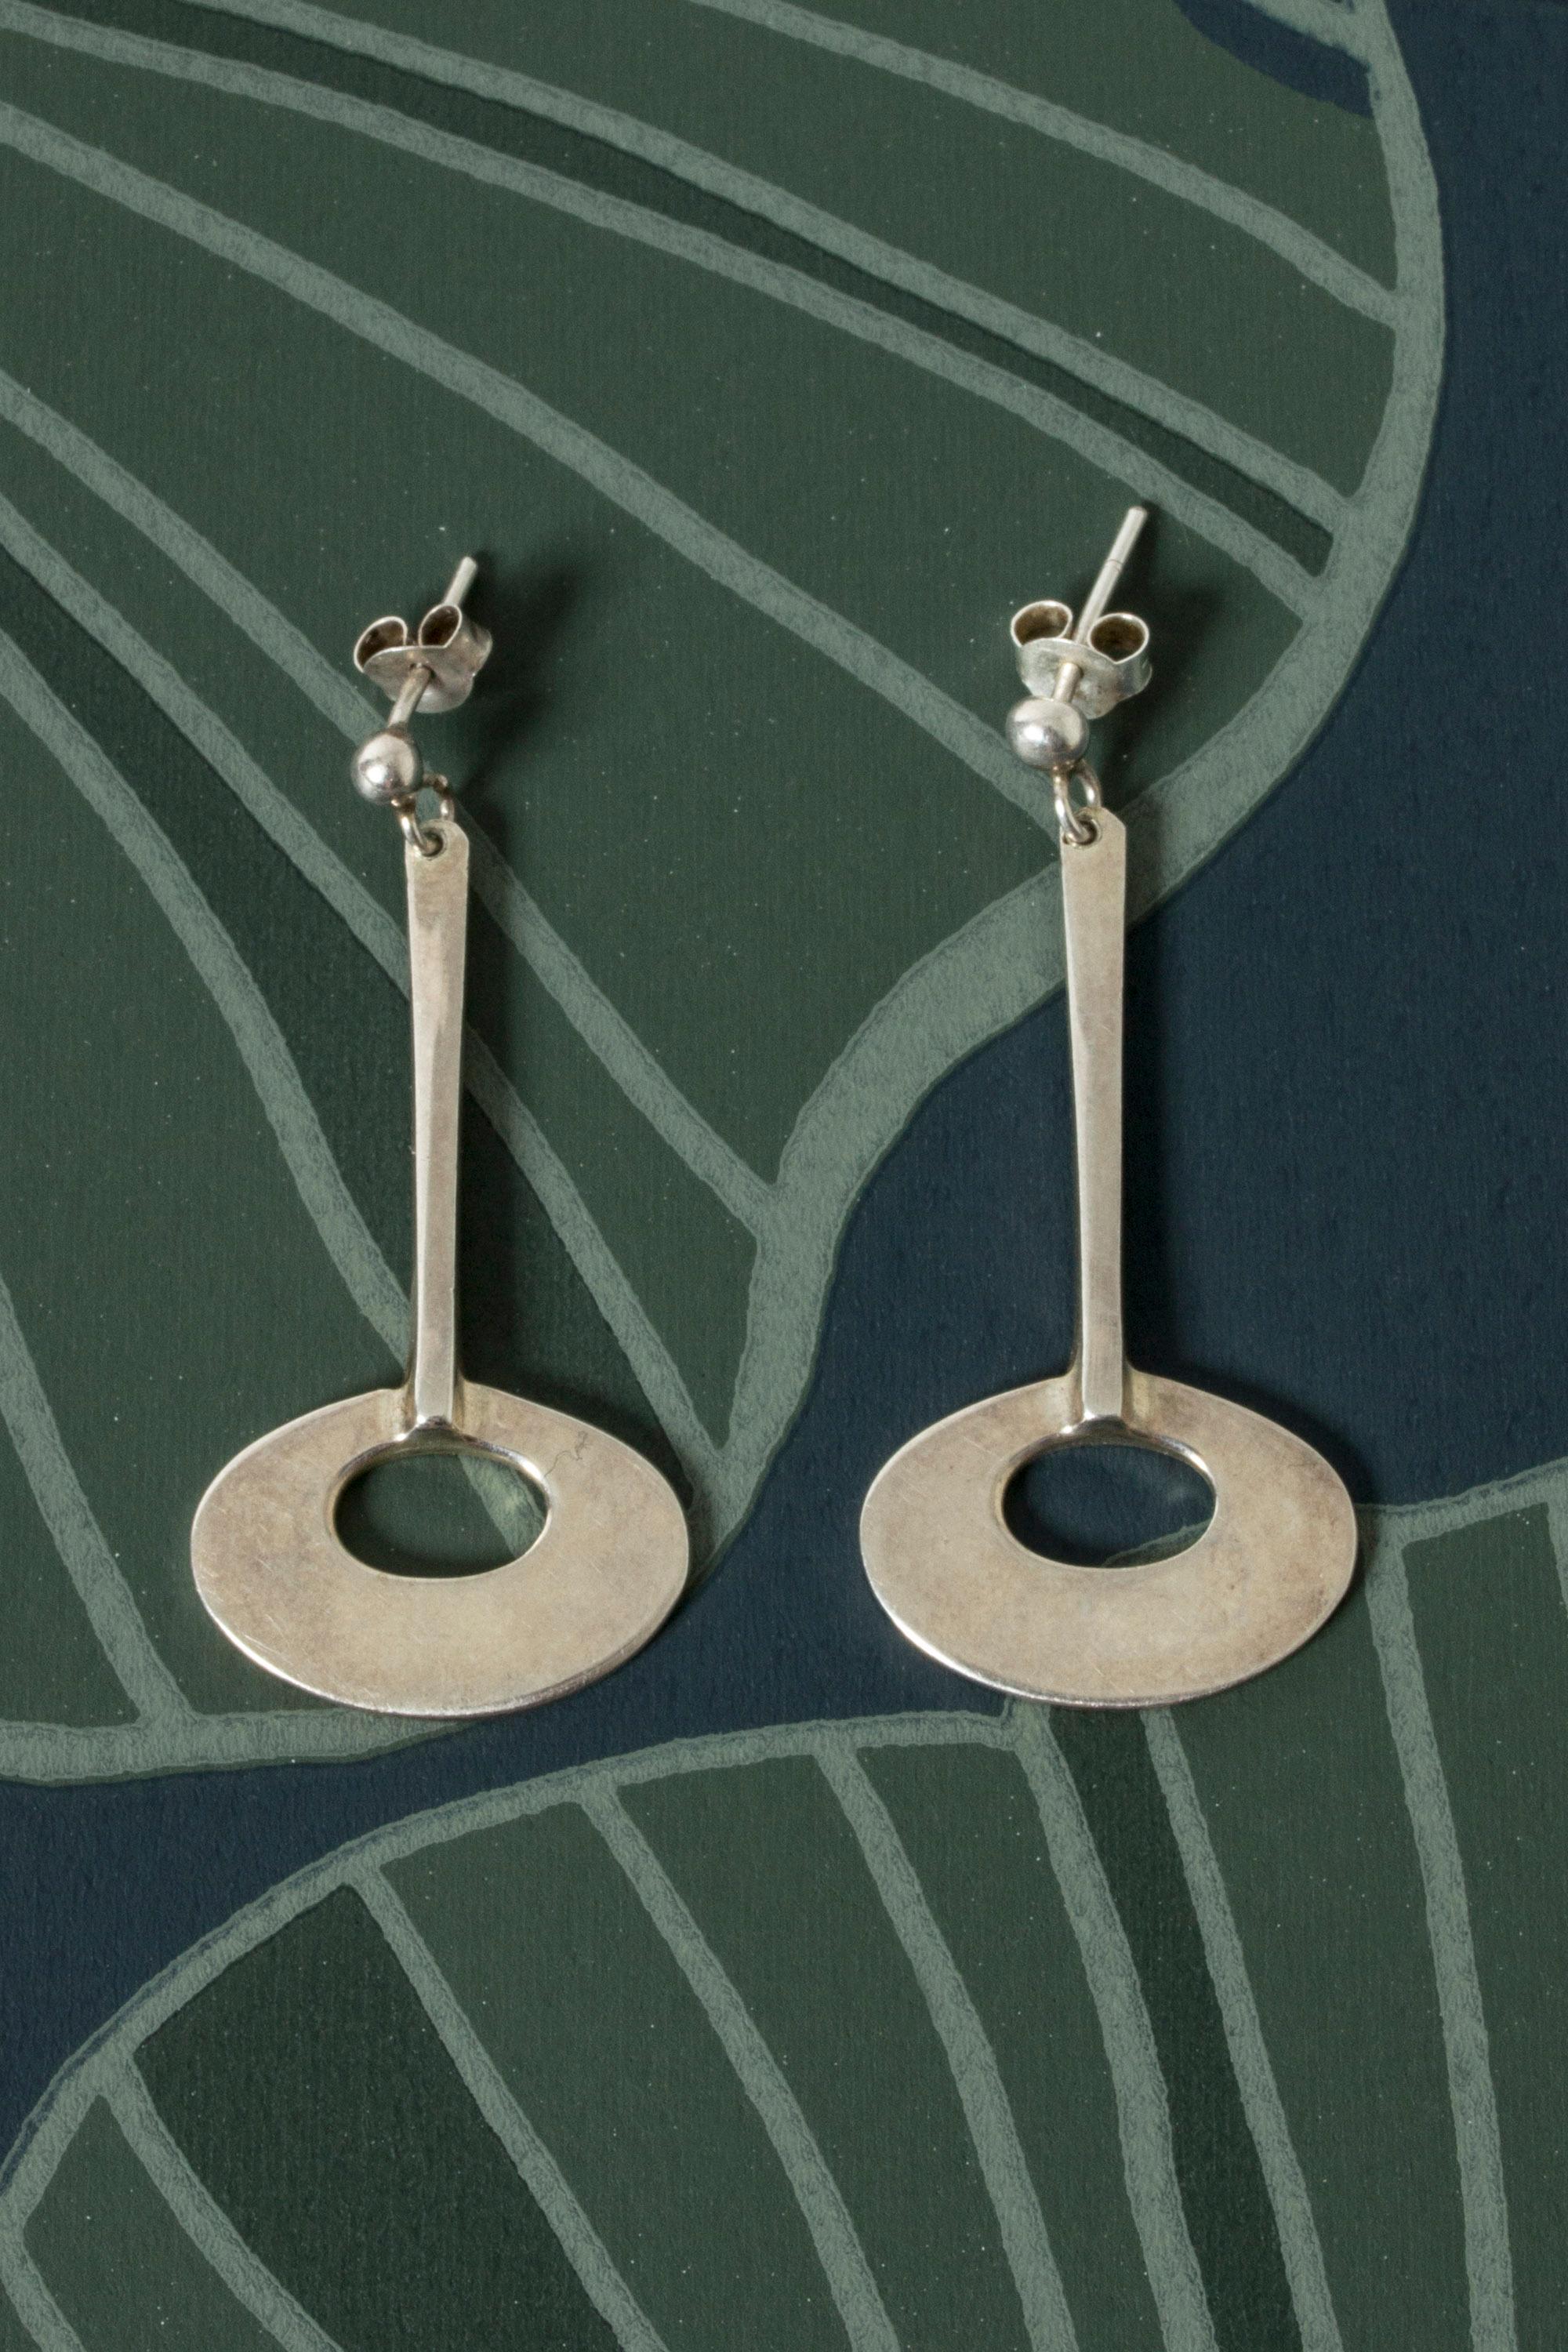 Pair of amazing silver earrings by Tone Vigeland in a cool, modernist design. Easy to wear pieces that stand out.
